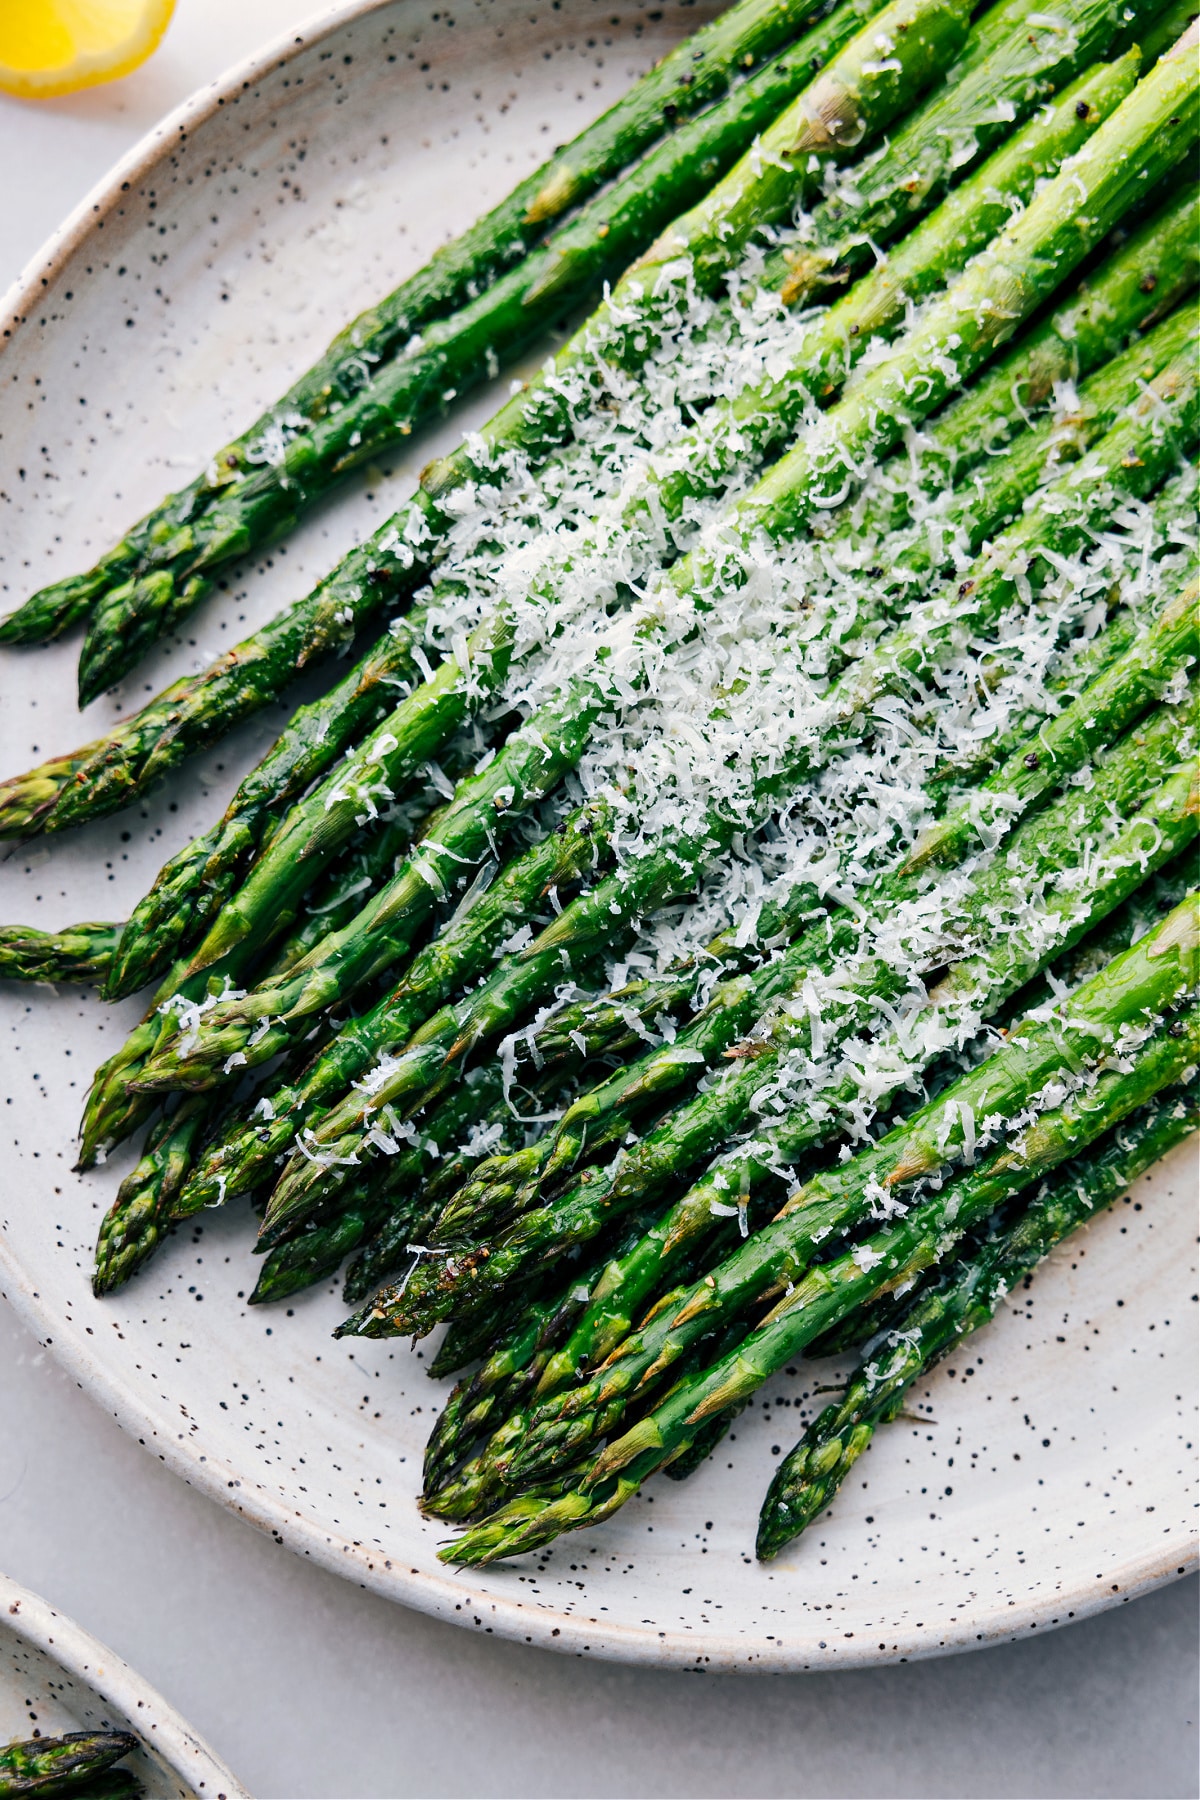 The roasted asparagus on a plate ready to be served.